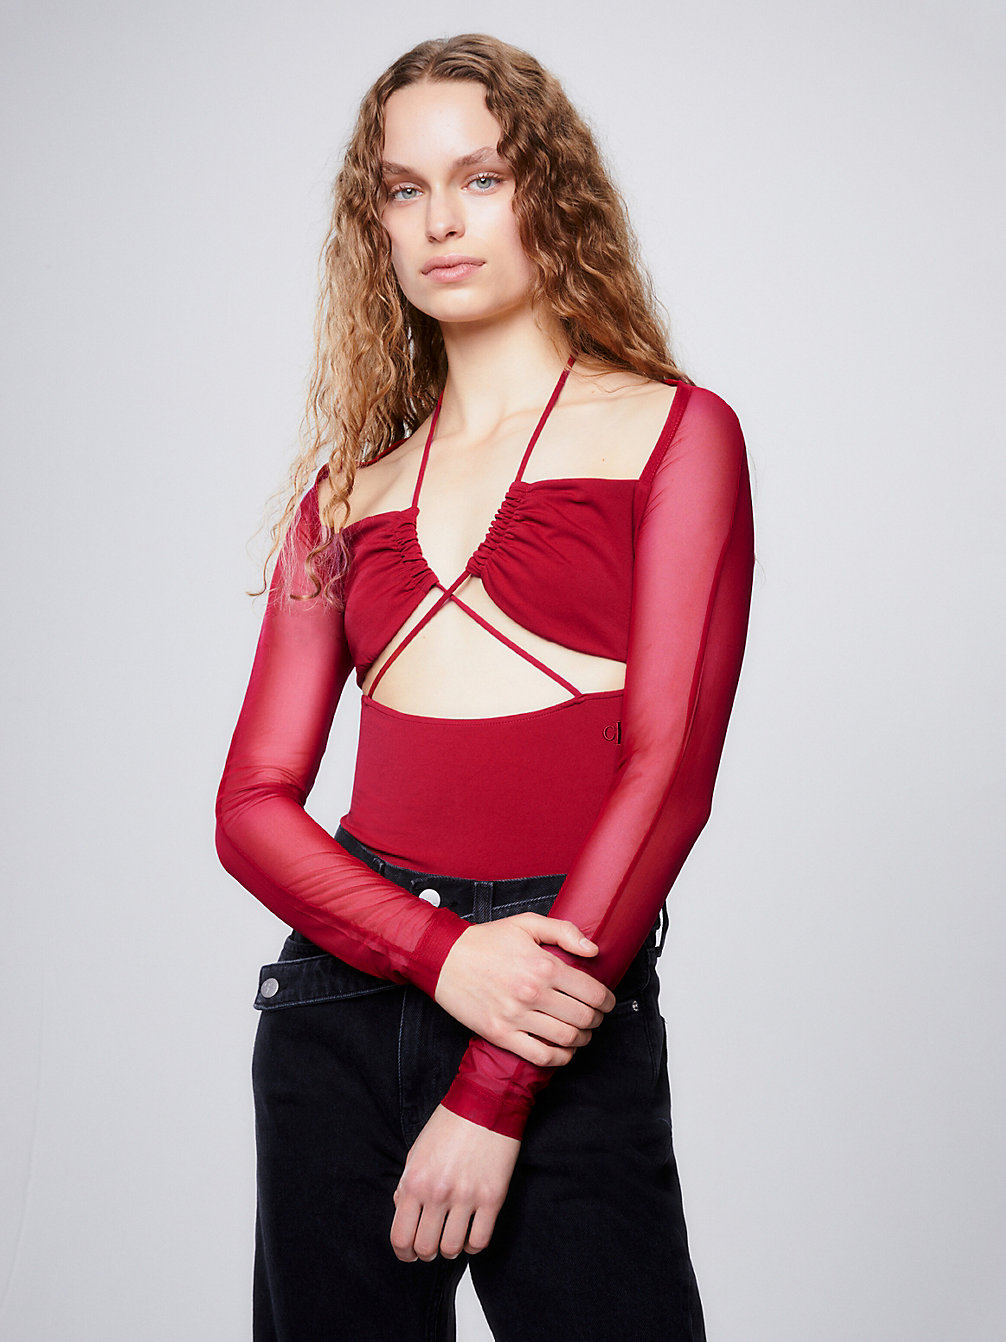 RADIANT RED Long Sleeve Cut Out Top undefined women Calvin Klein